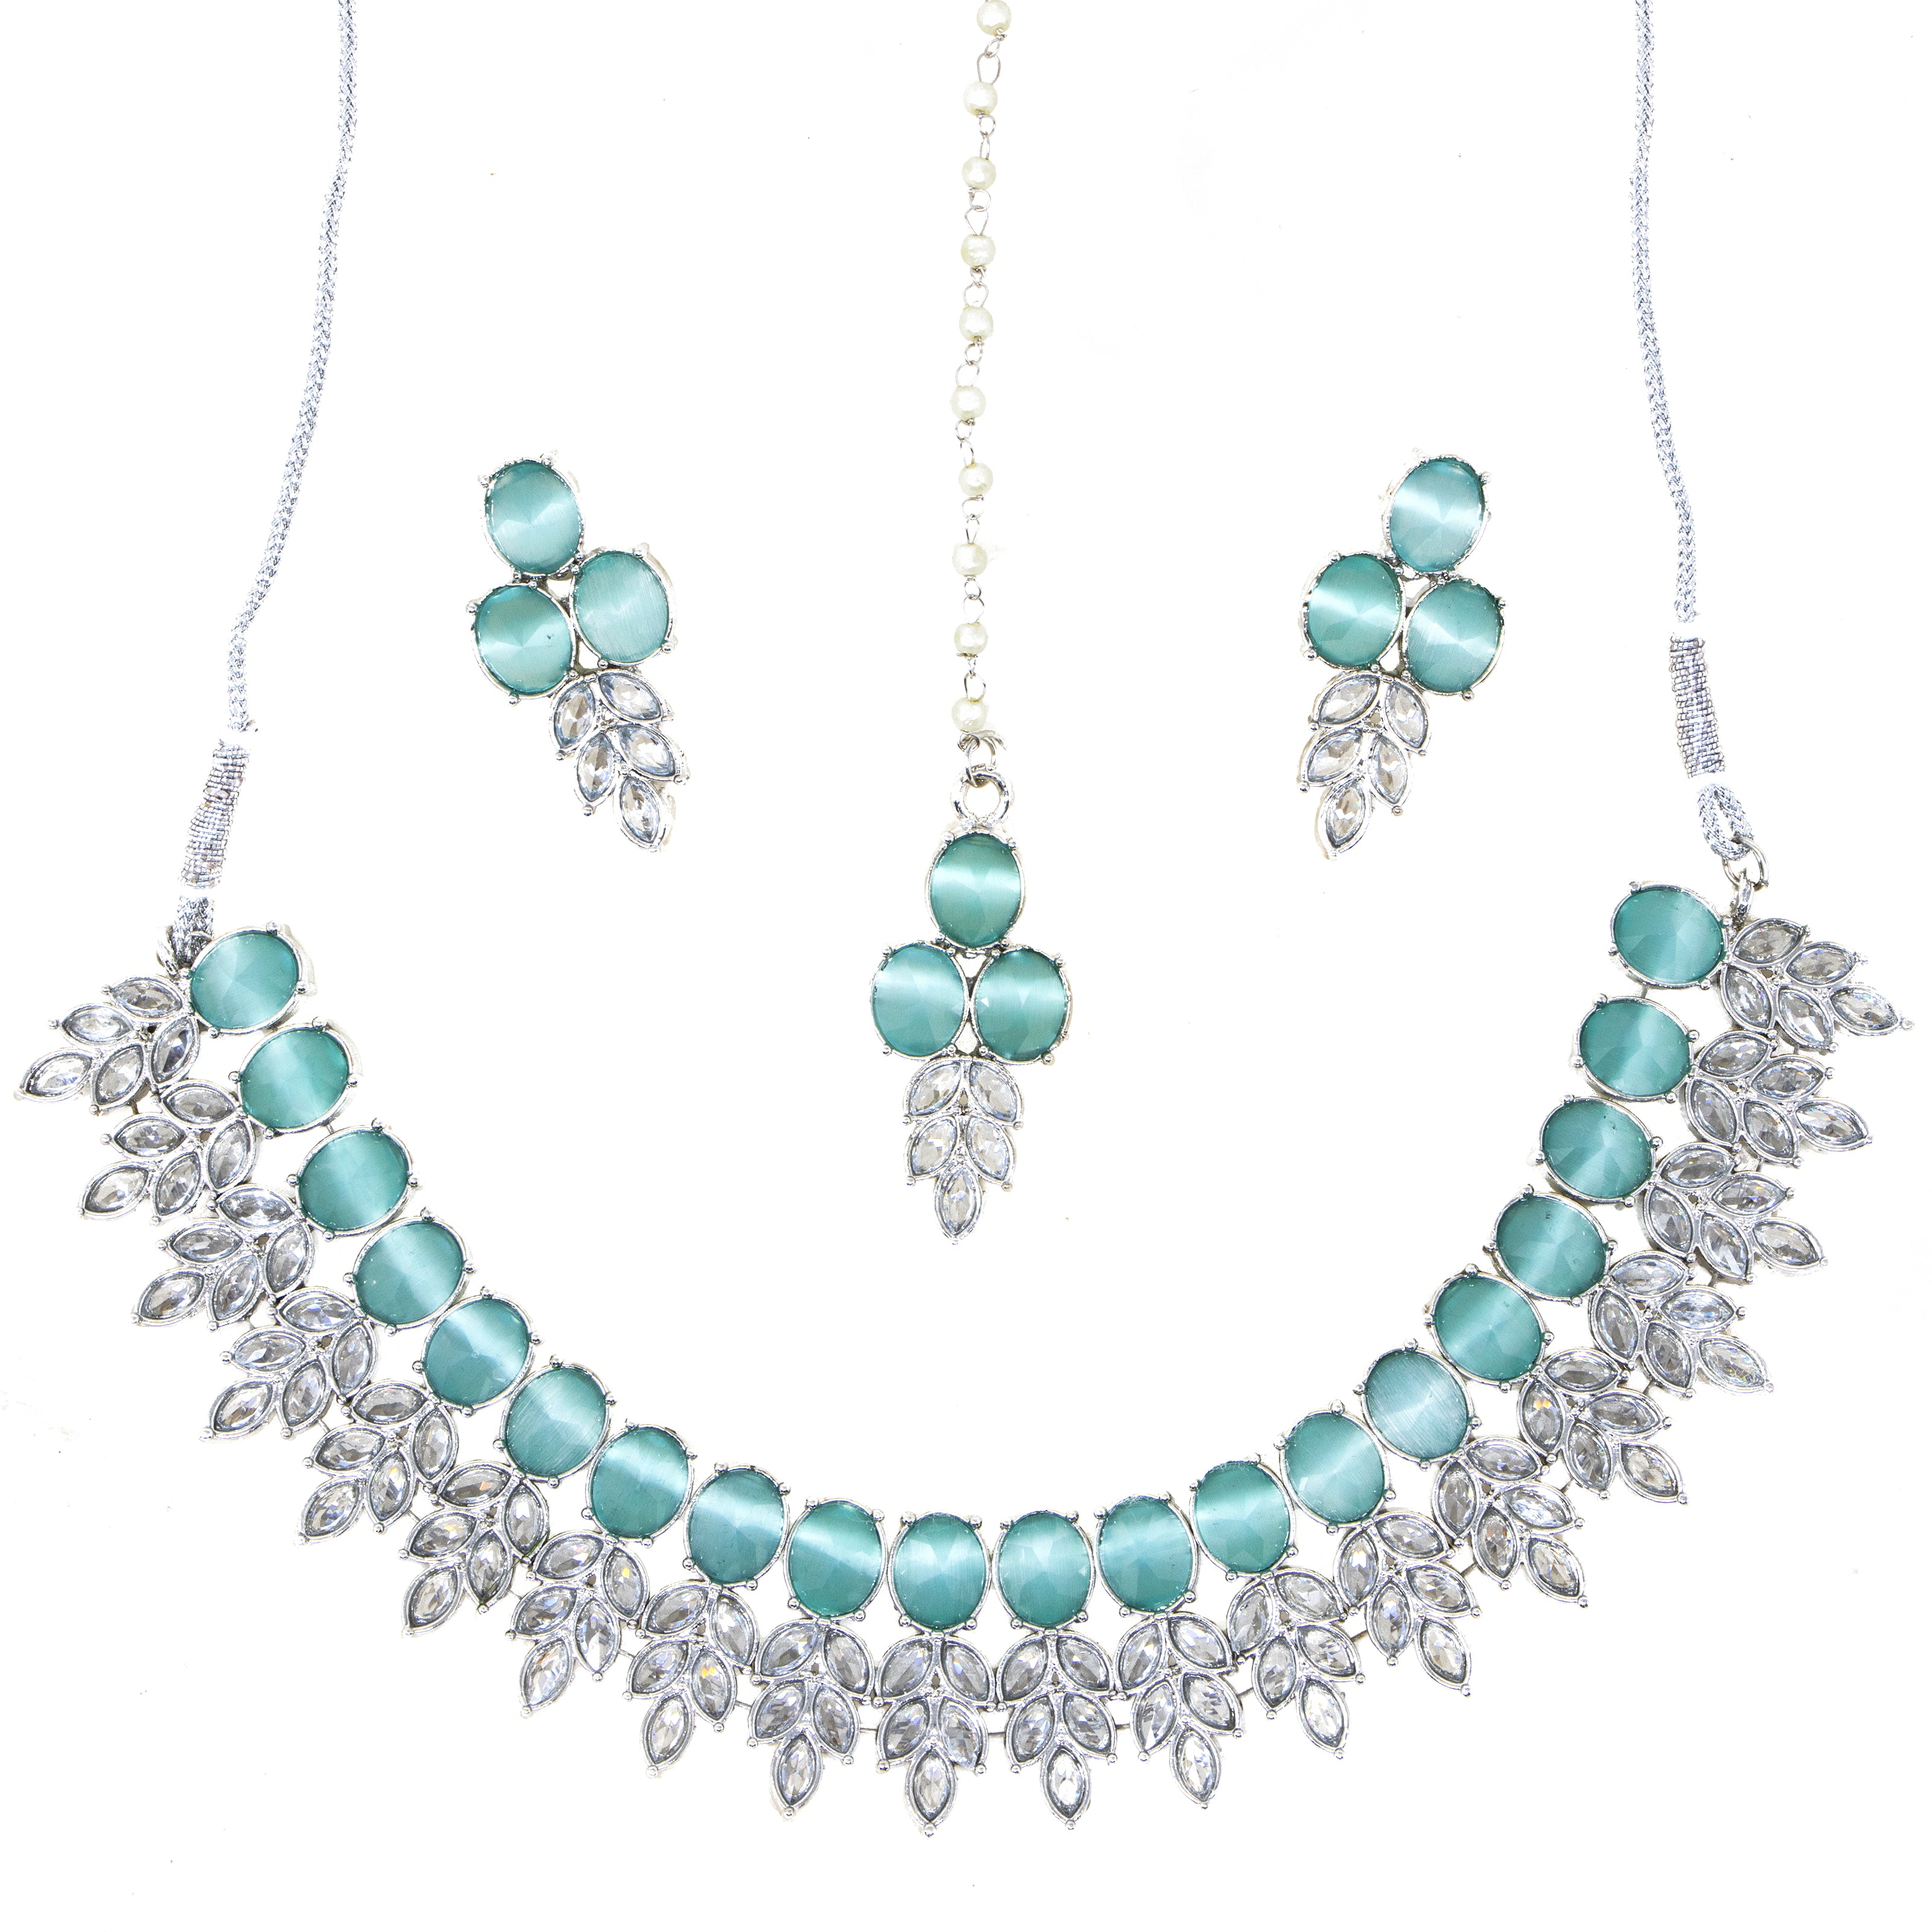 Silver 3 piece jewelry set- Necklace, earrings,& bindi with clear crystals & baby blue stones.